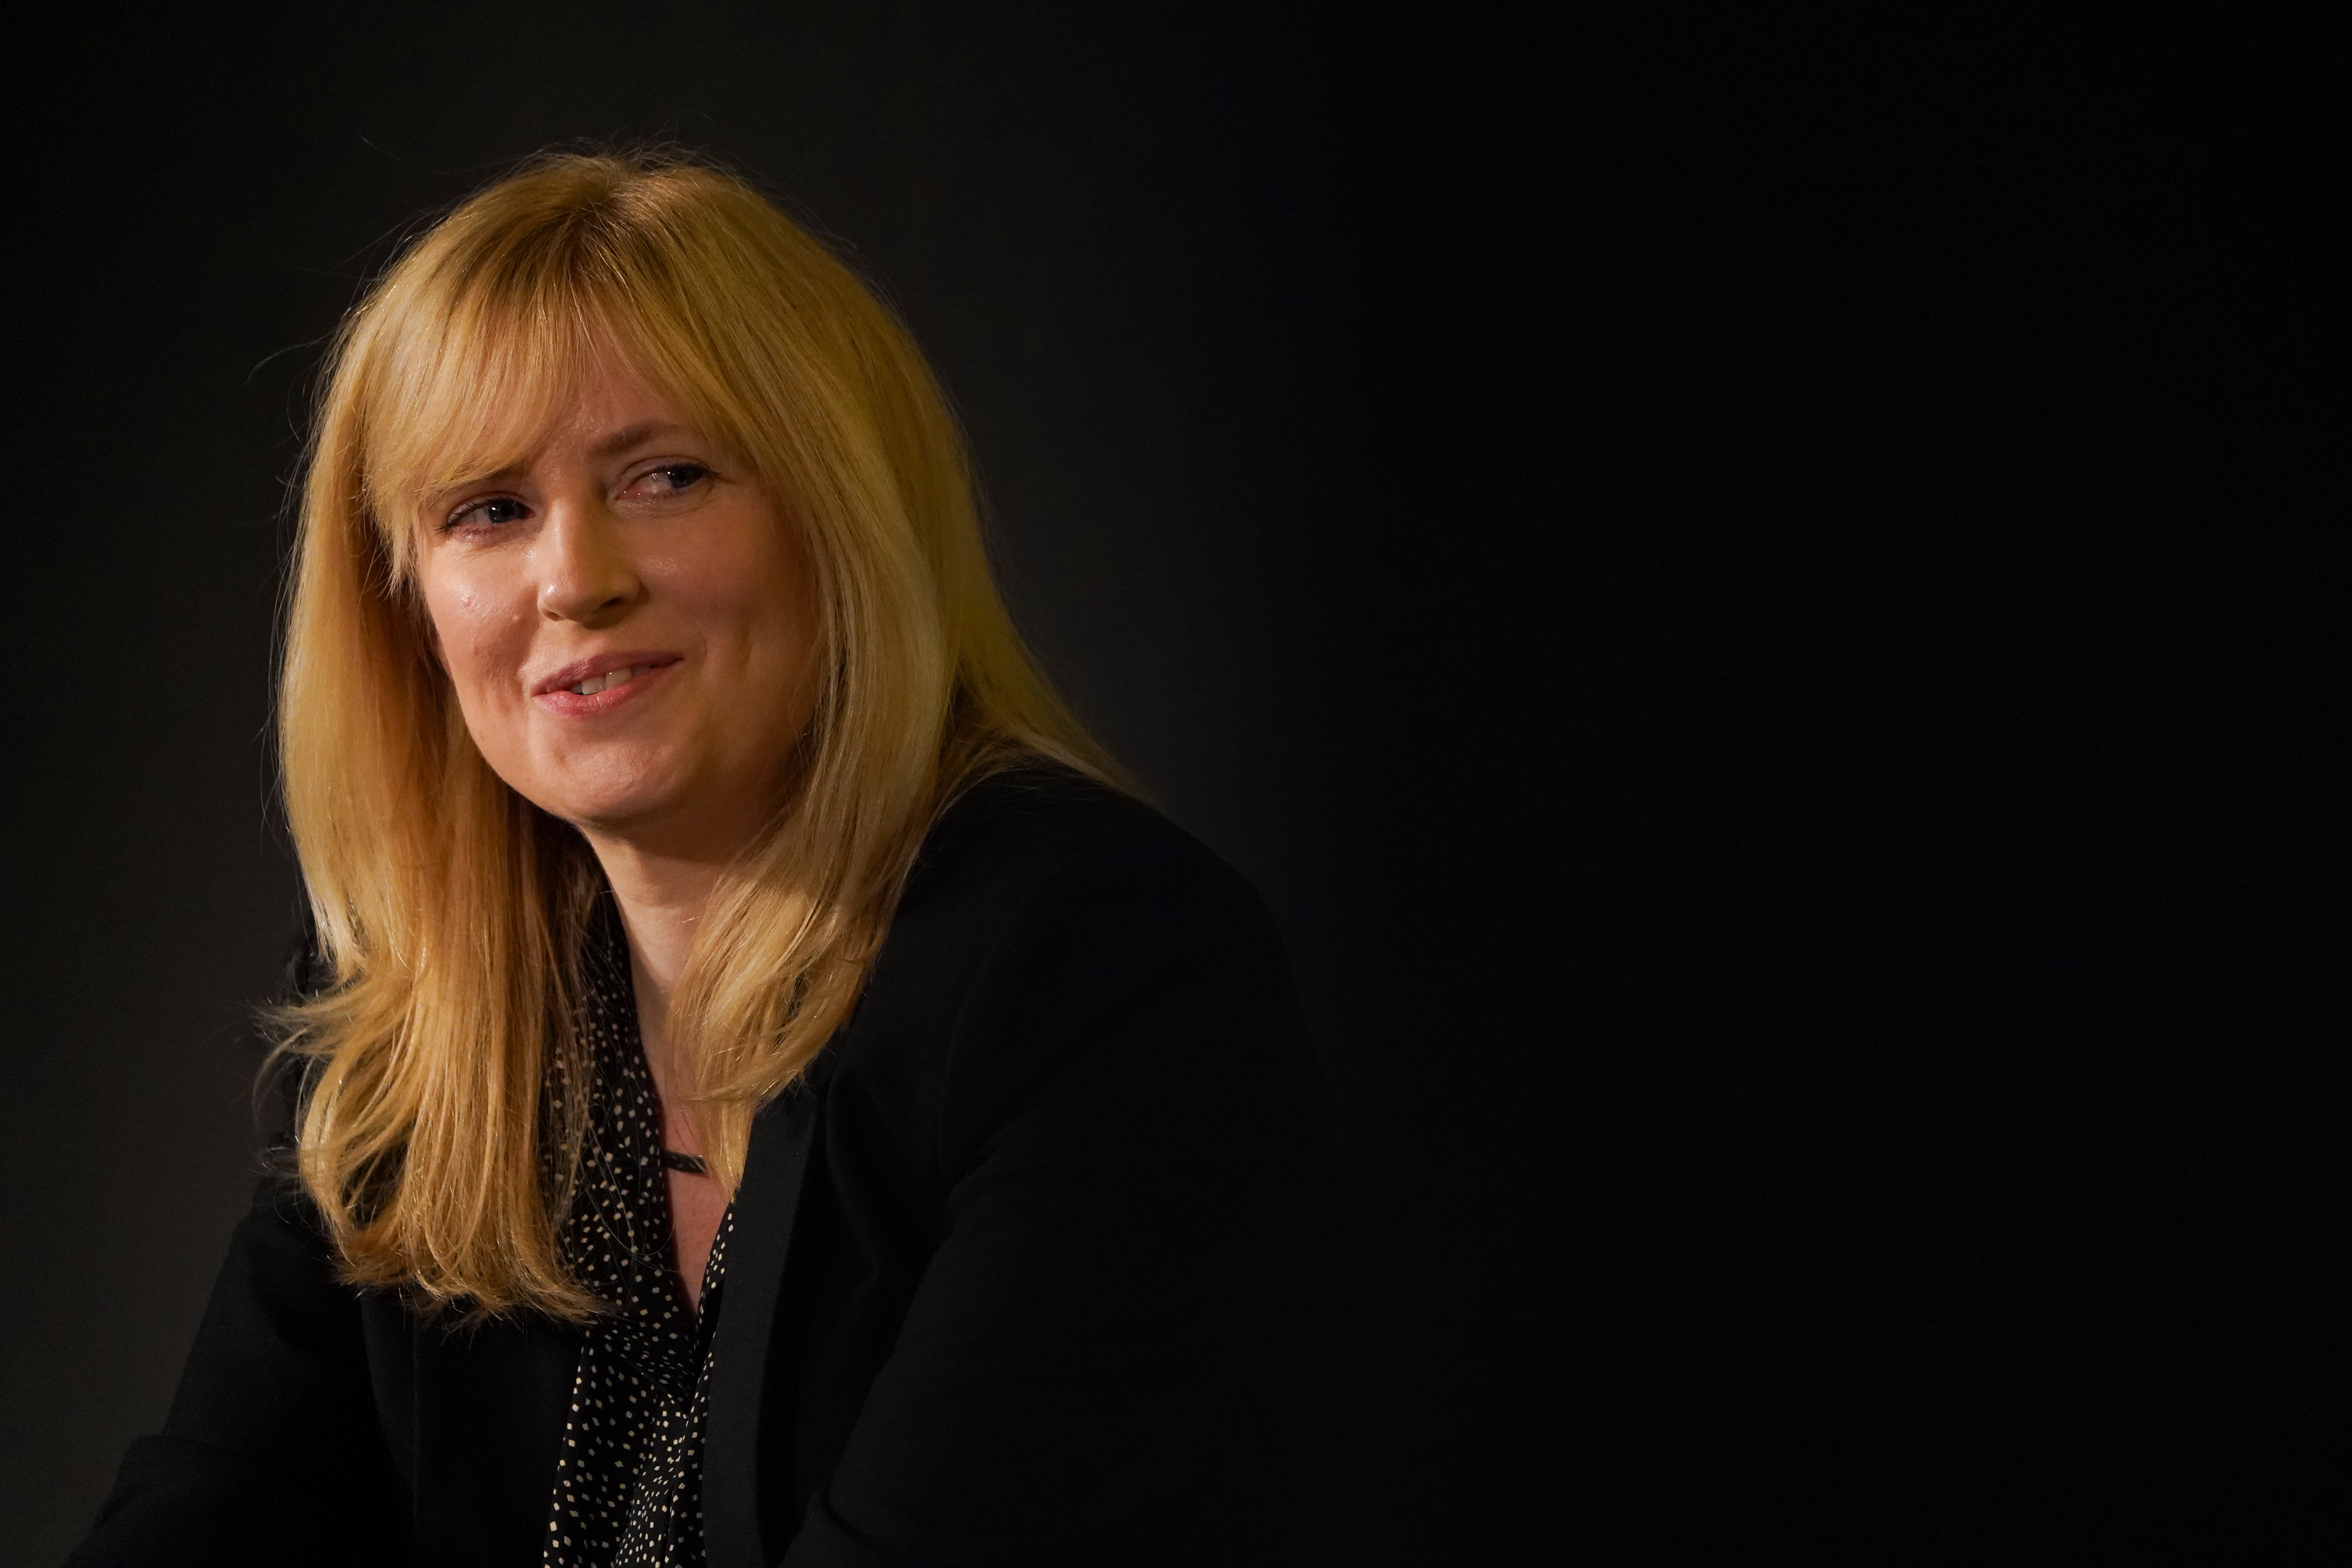 Labour MP Rosie Duffield has previously faced abuse over her stance on trans issues (Kirsty O’Connor/PA)